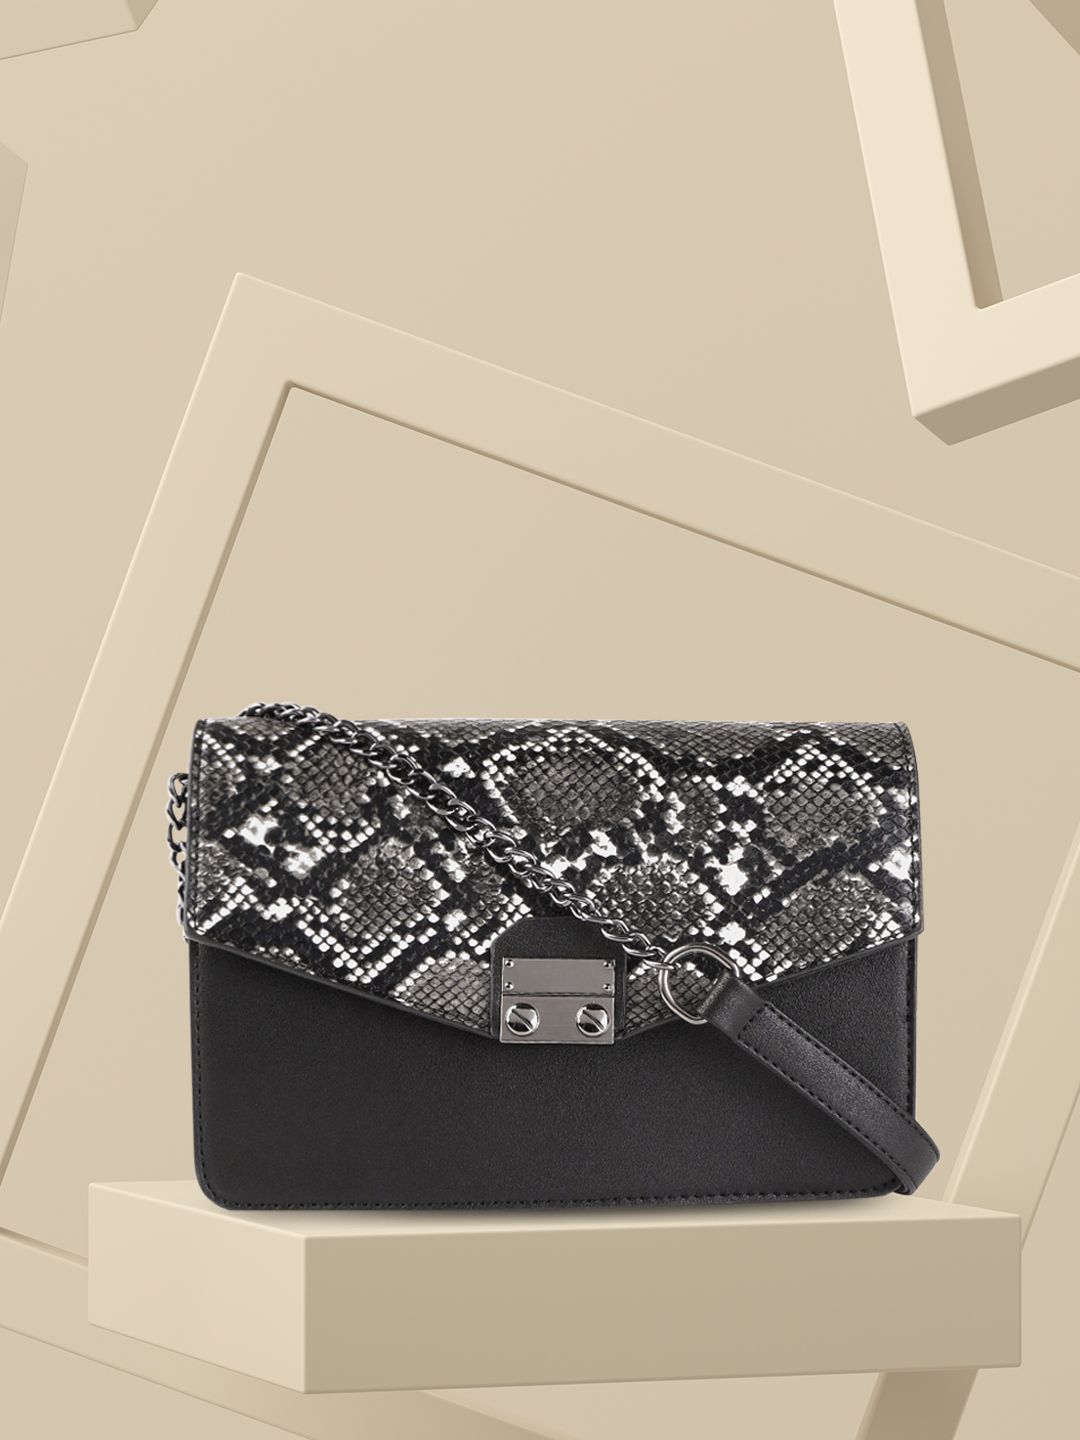 DressBerry Black & Charcoal Grey Snakeskin Textured Sling Bag Price in India